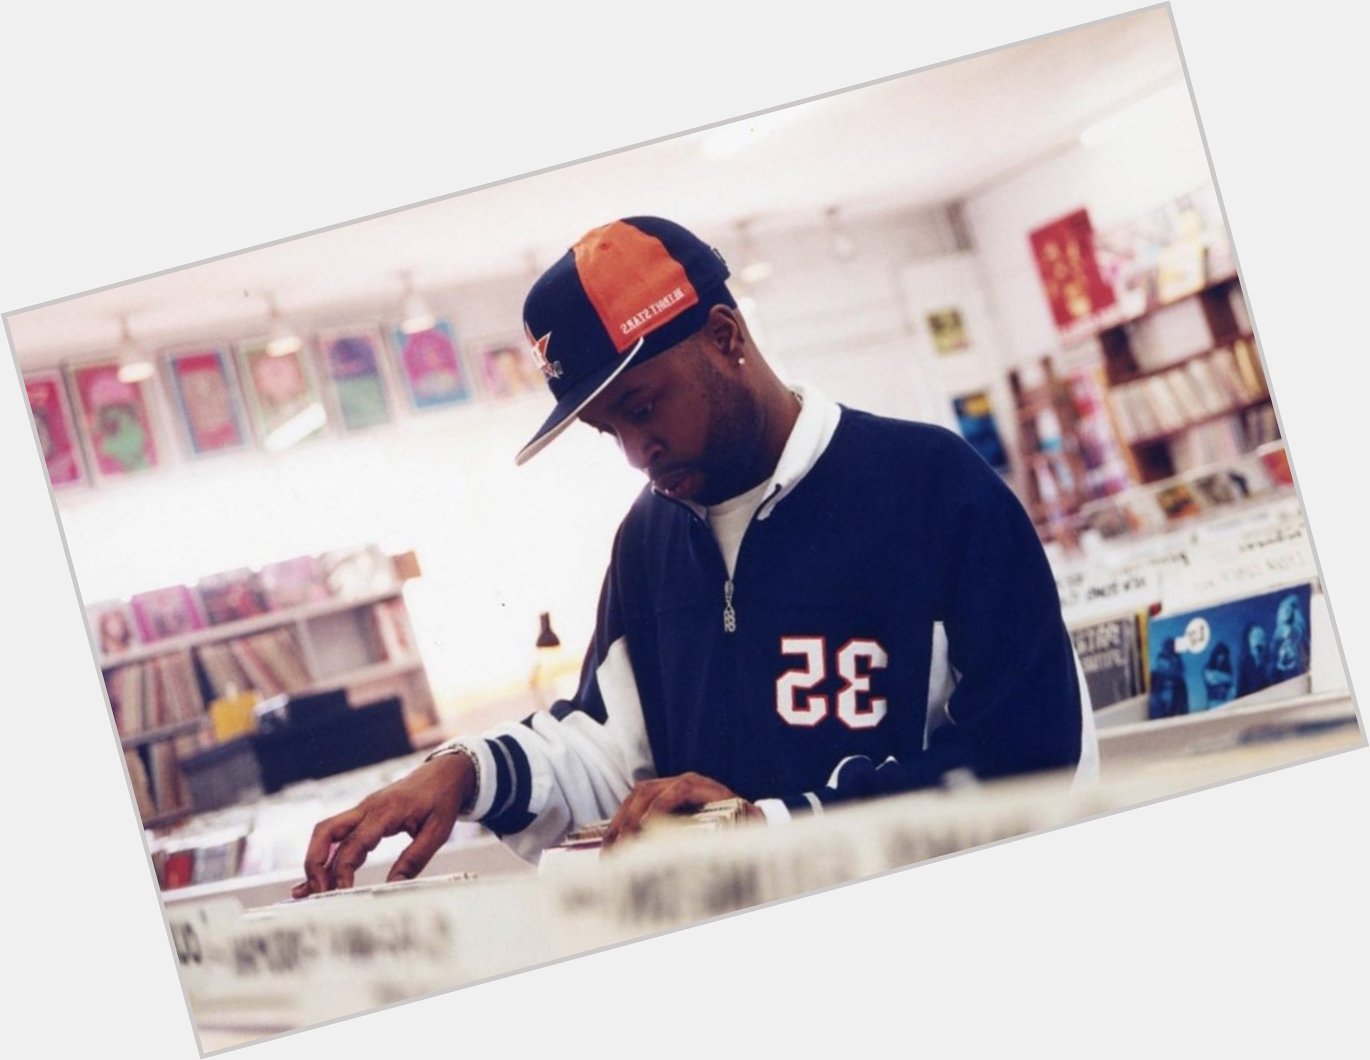 J Dilla would have turned 45 today  RIP and Happy Birthday 